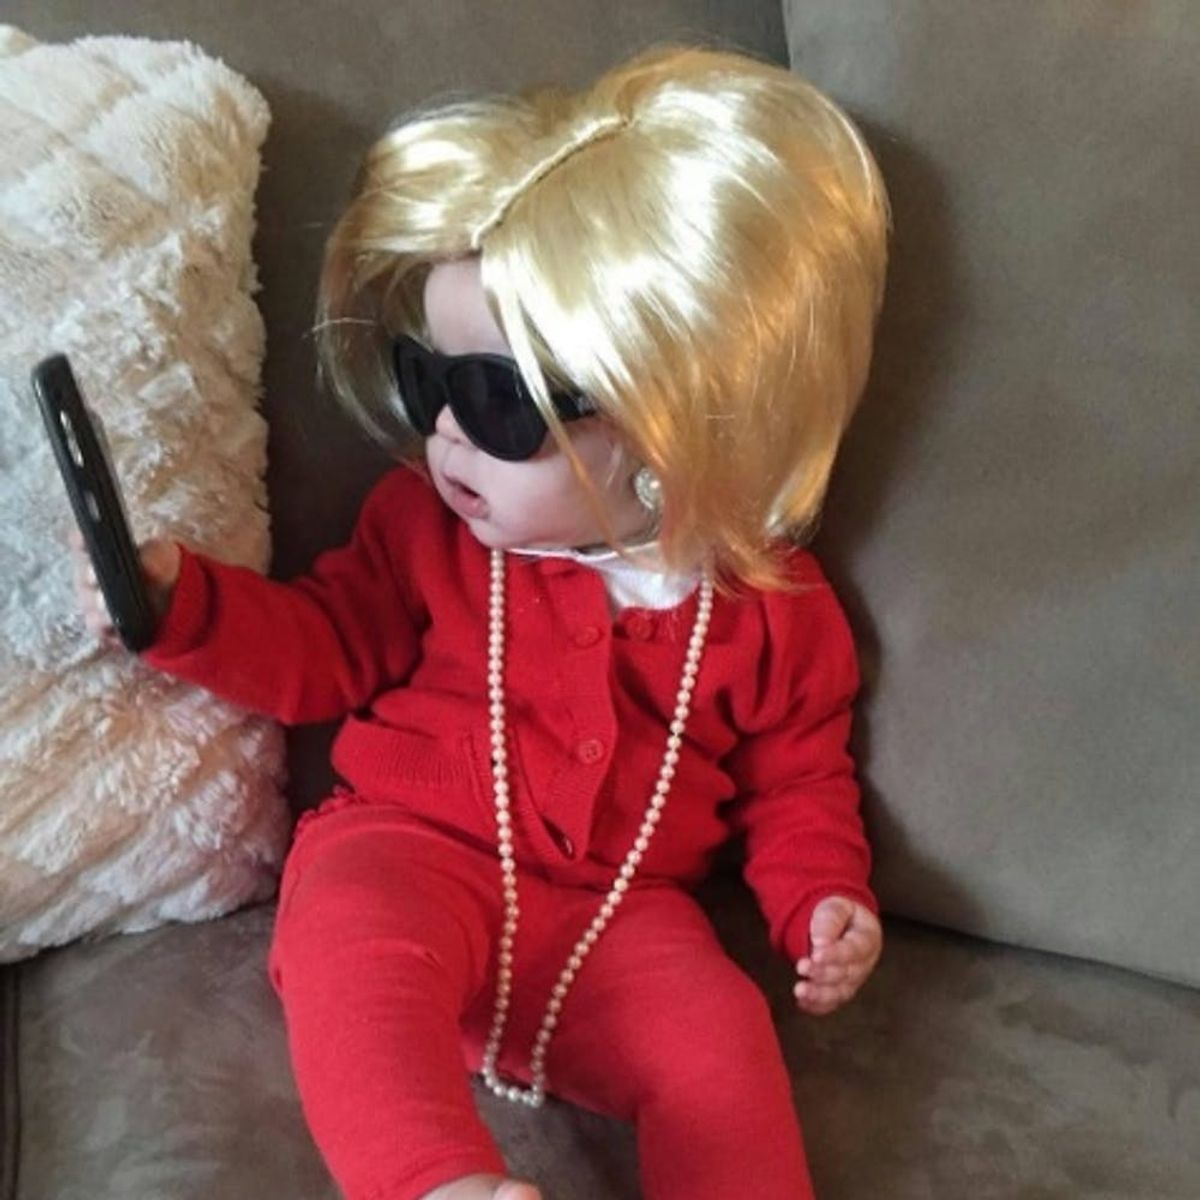 Babies Dressed Up As Hillary Clinton Might Be the BEST (and Cutest) Part of the Election